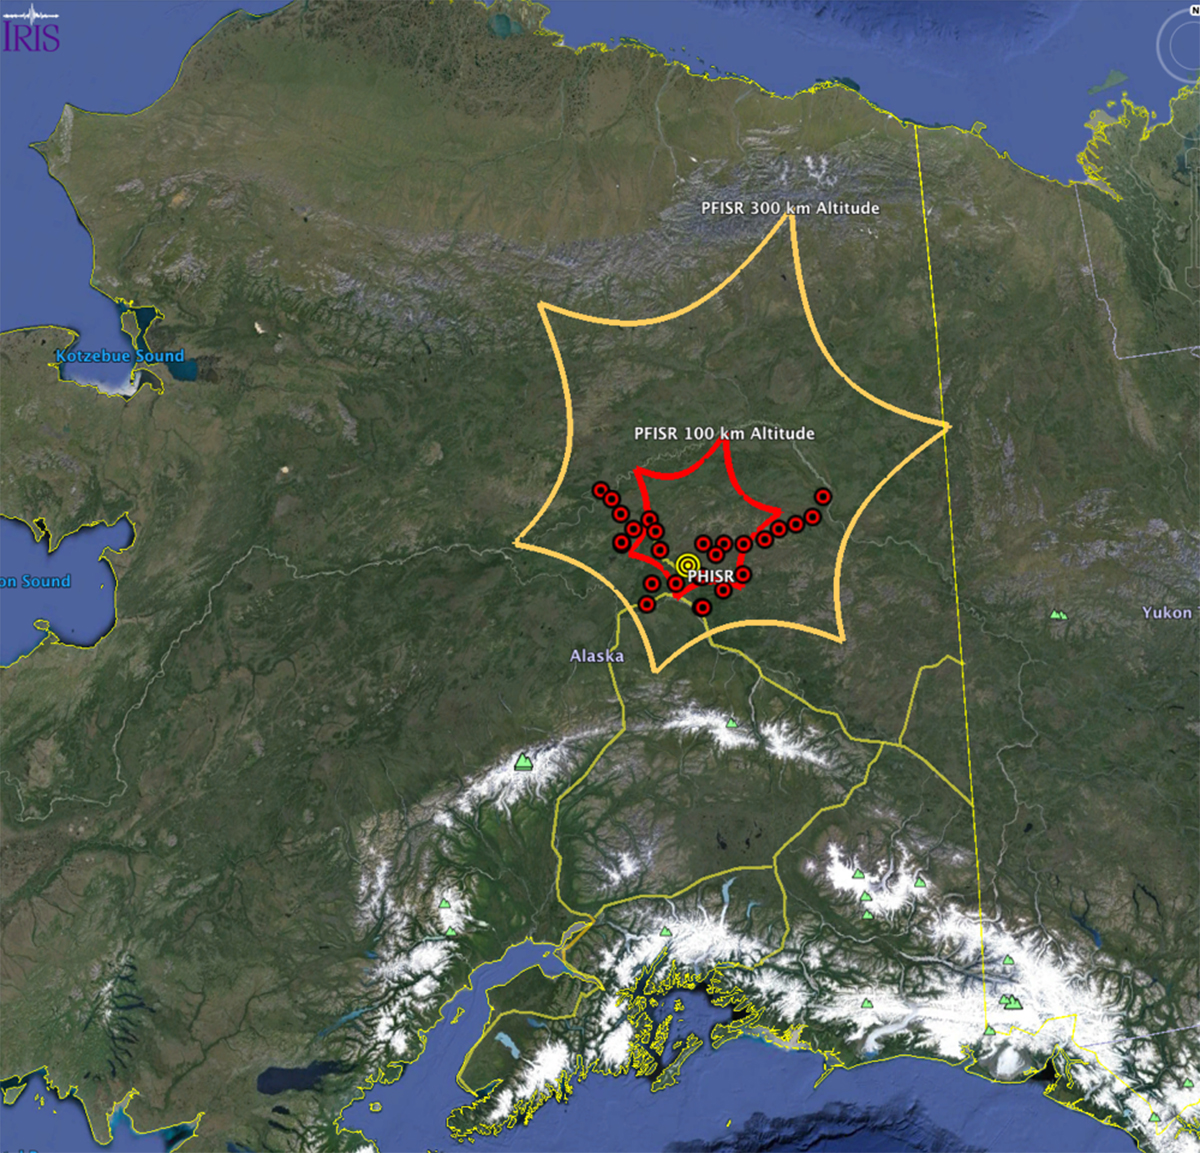 Site map of the MT Array in AK